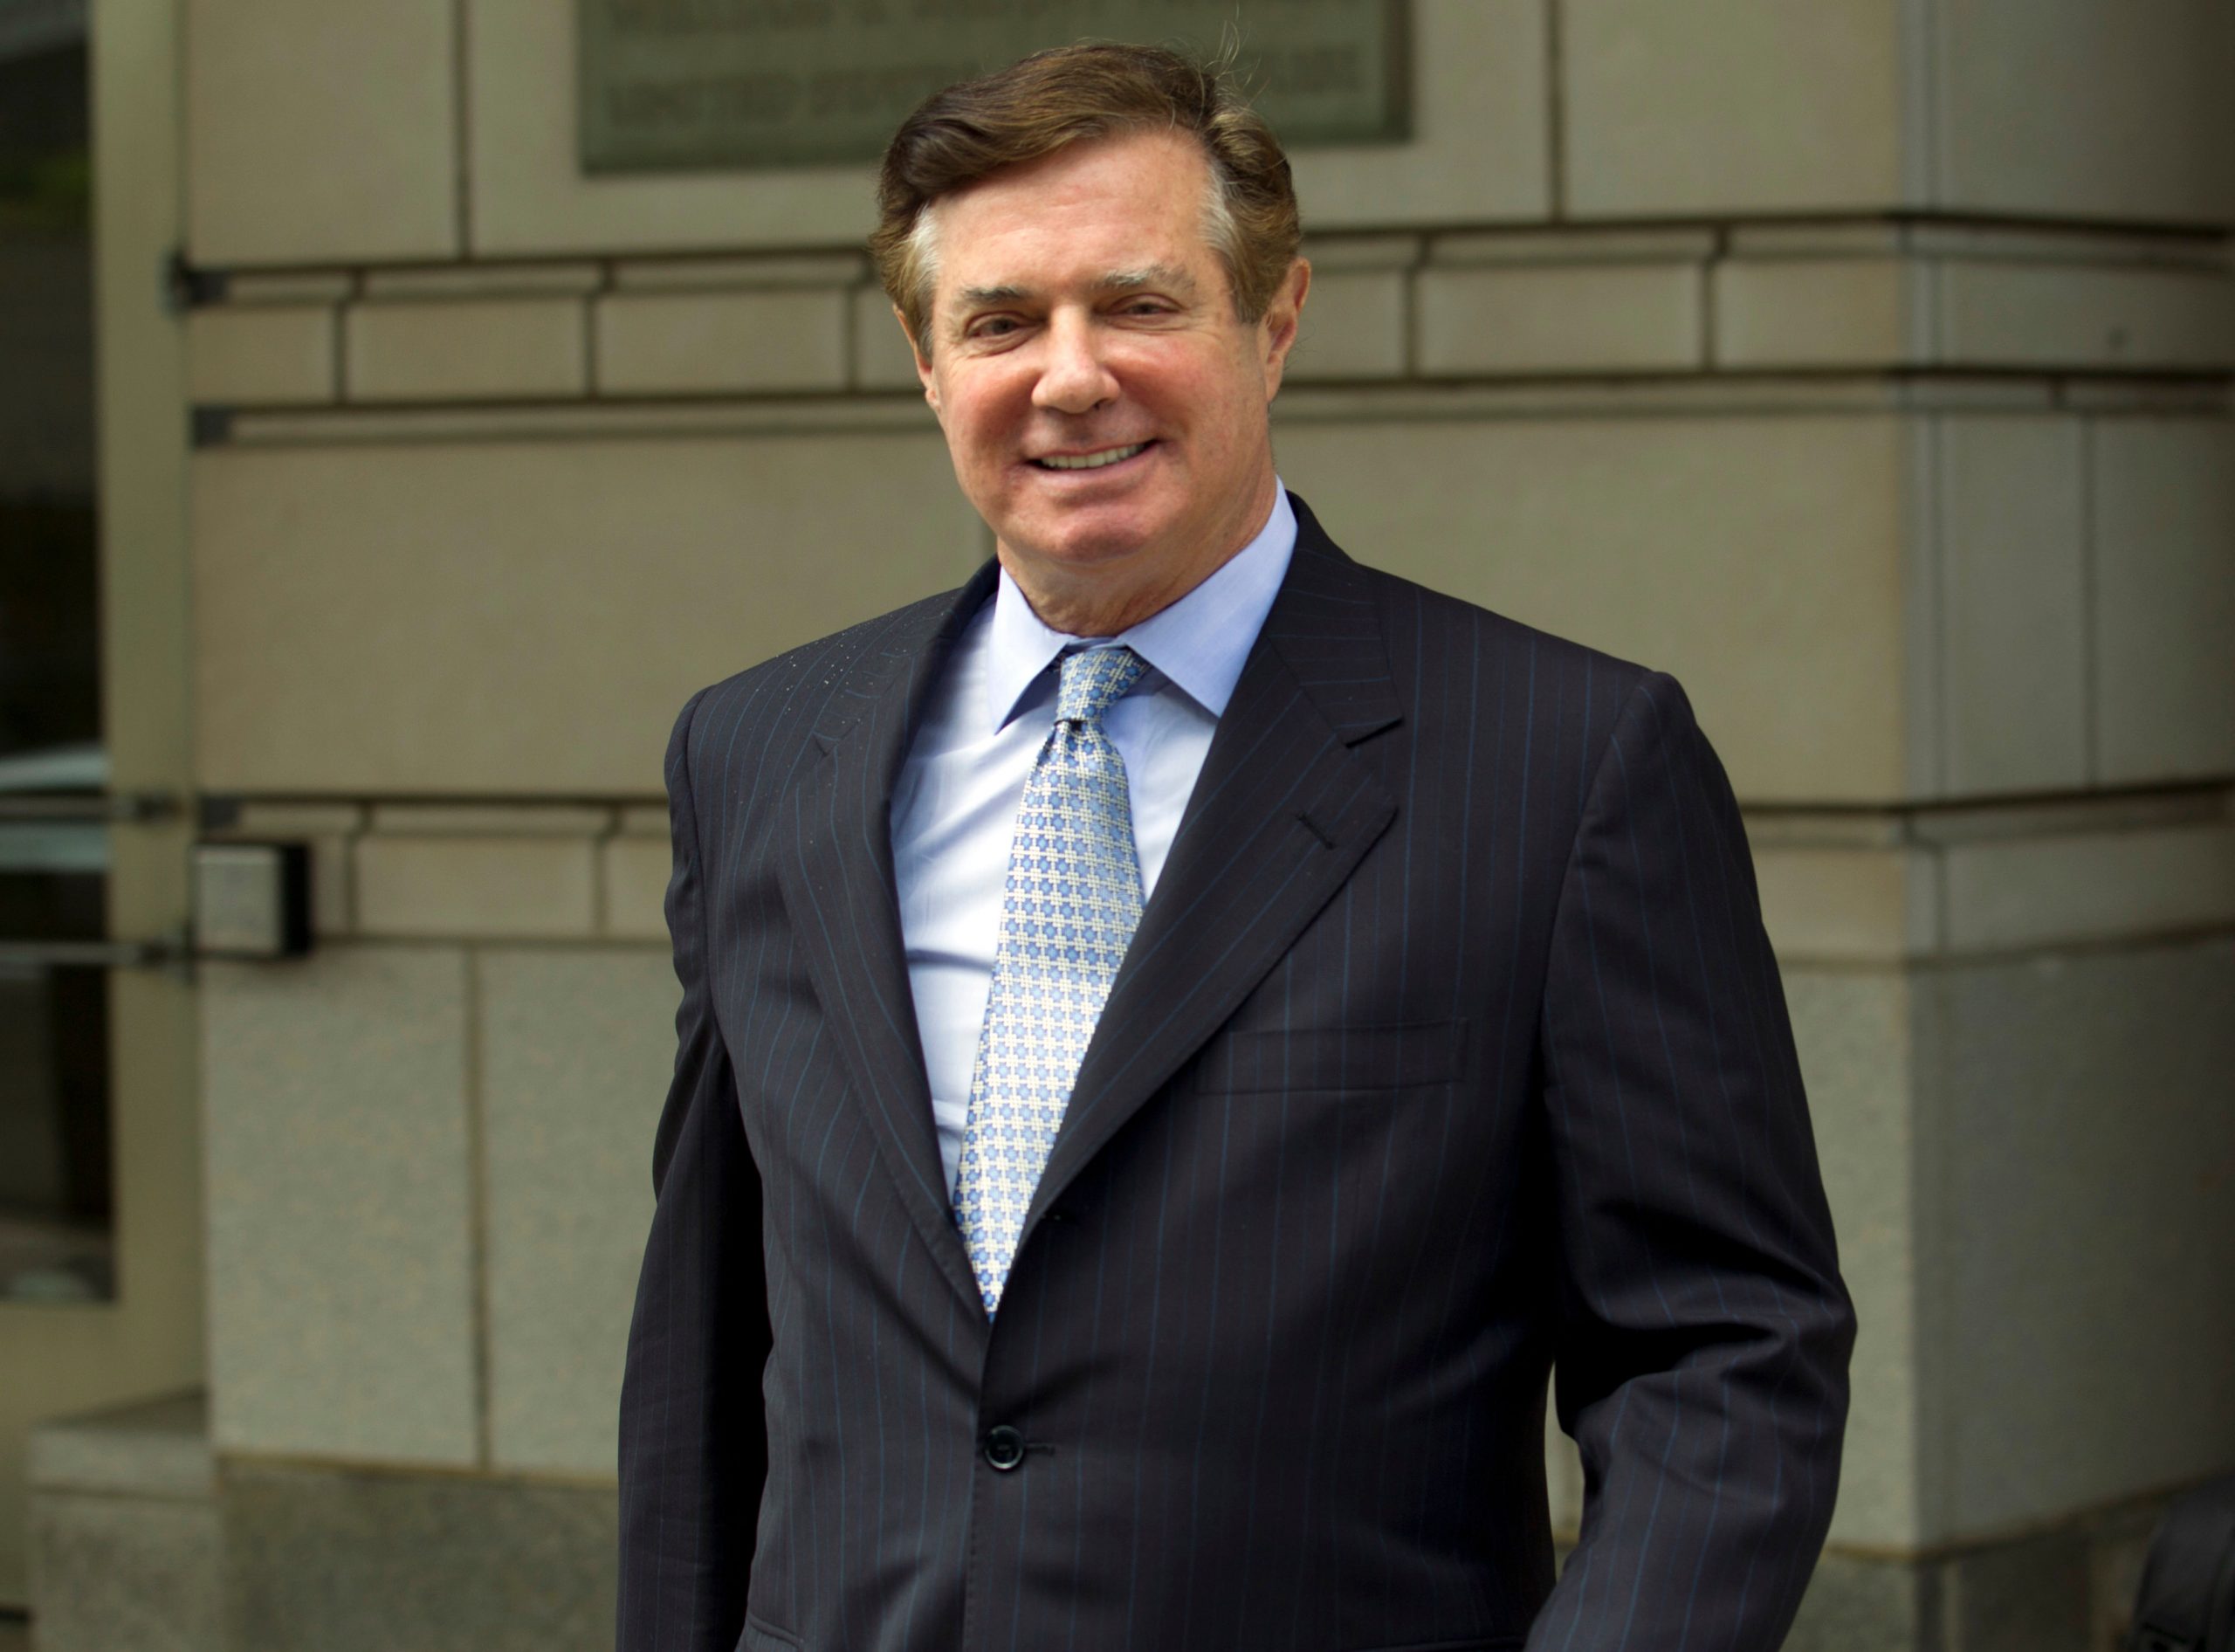 Who is Paul Manafort?